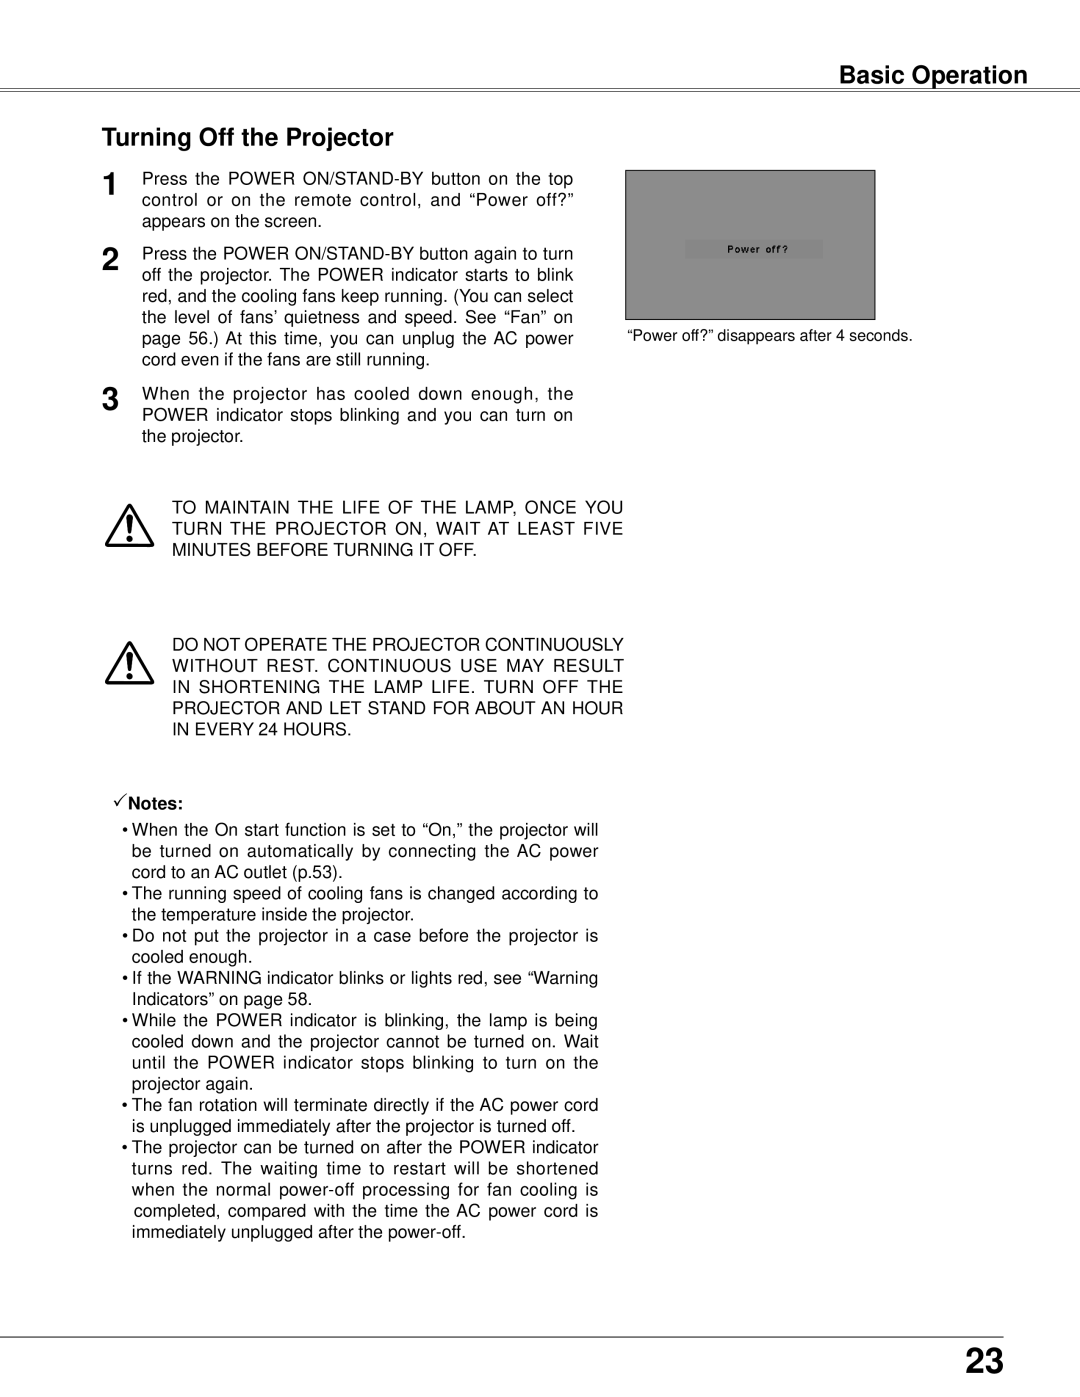 Eiki LC-XB42N owner manual Basic Operation Turning Off the Projector, “Power off?” disappears after 4 seconds 